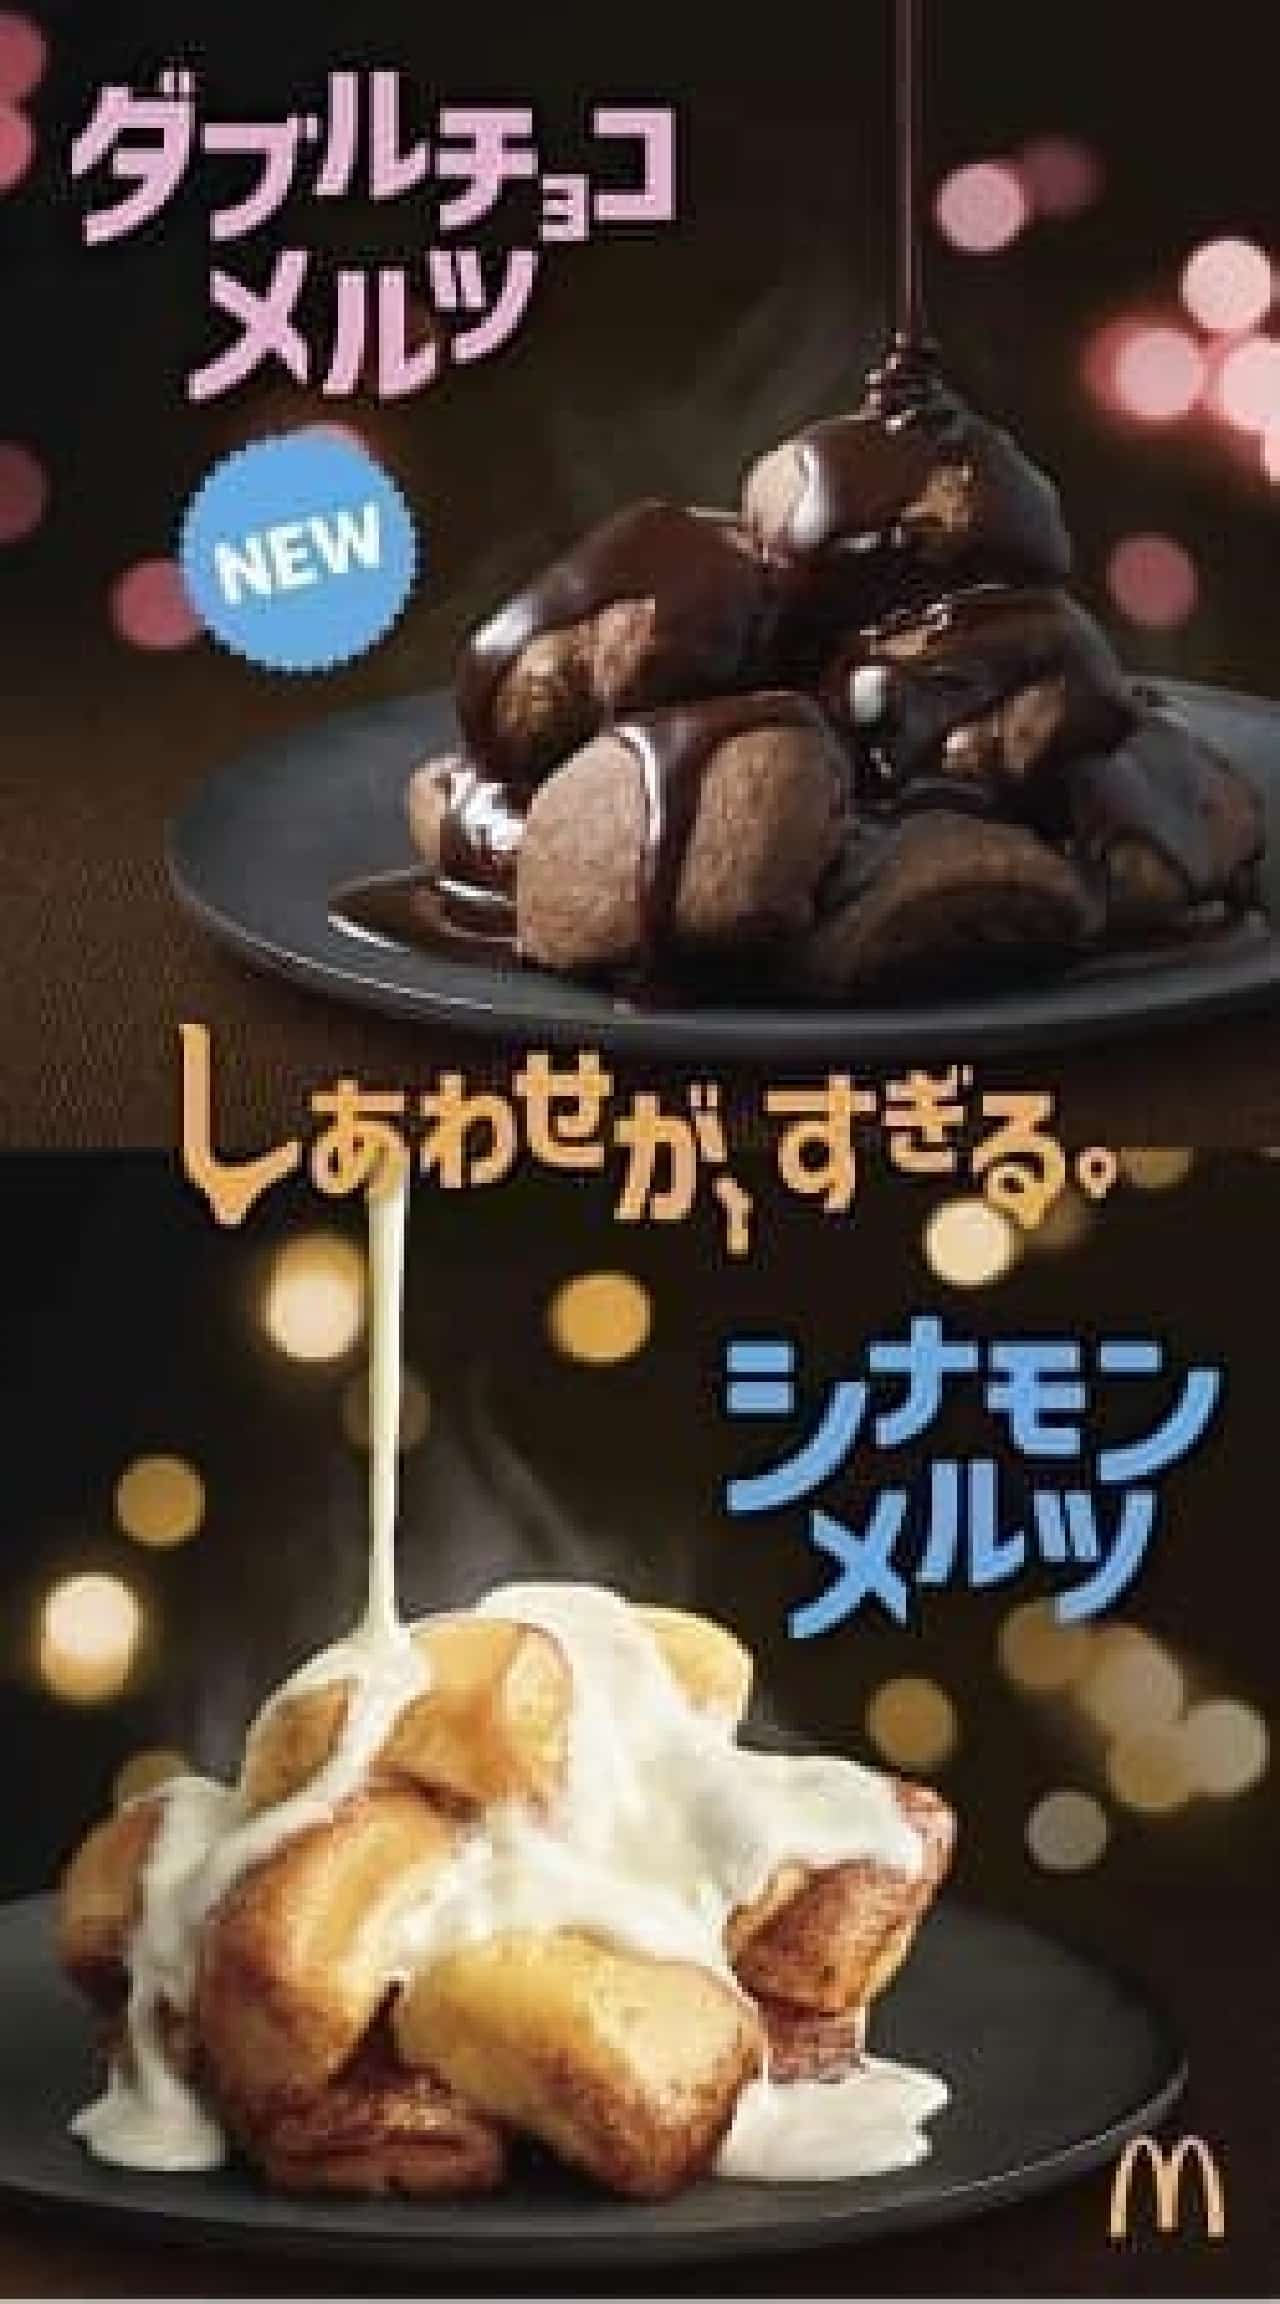 McDonald's "Cinnamon Melts" and "Double Chocolate Melts"